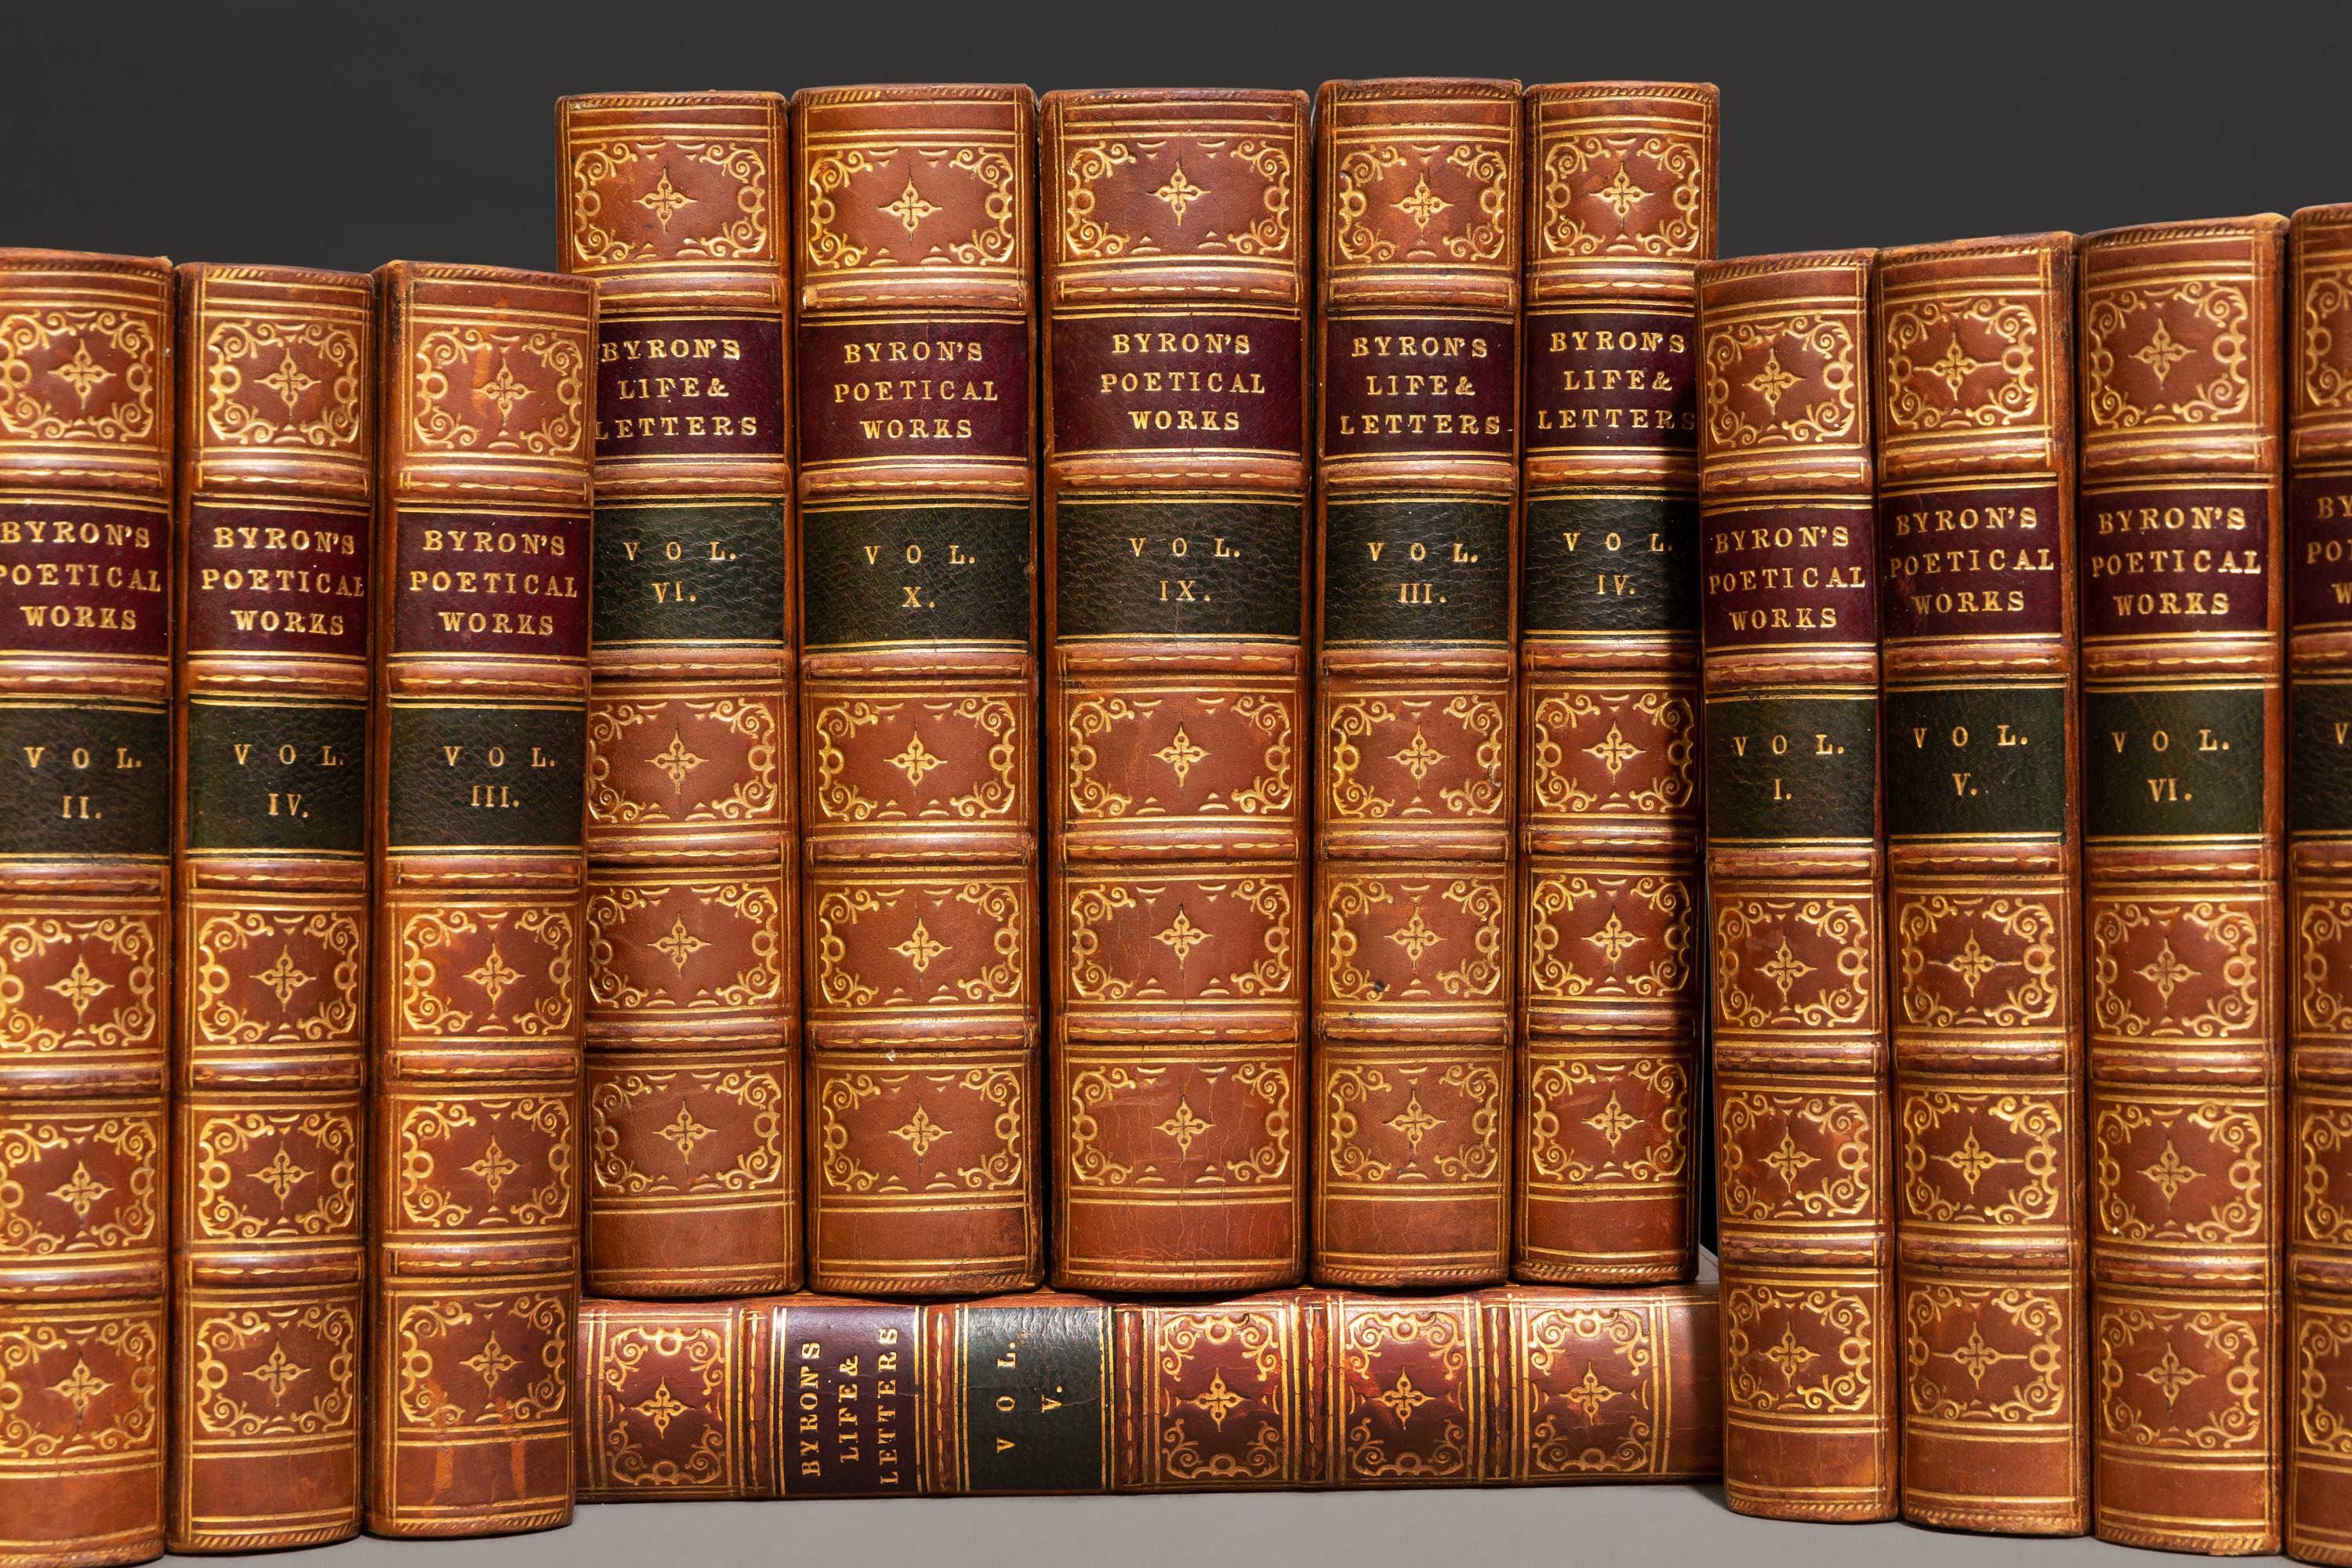 16 Volumes. Lord Byron. The Poetical Works. Bound in full tan calf. Raised bands, purple and green labels, gilt on covers and spines. 
Published: London: John Murray, 1851.